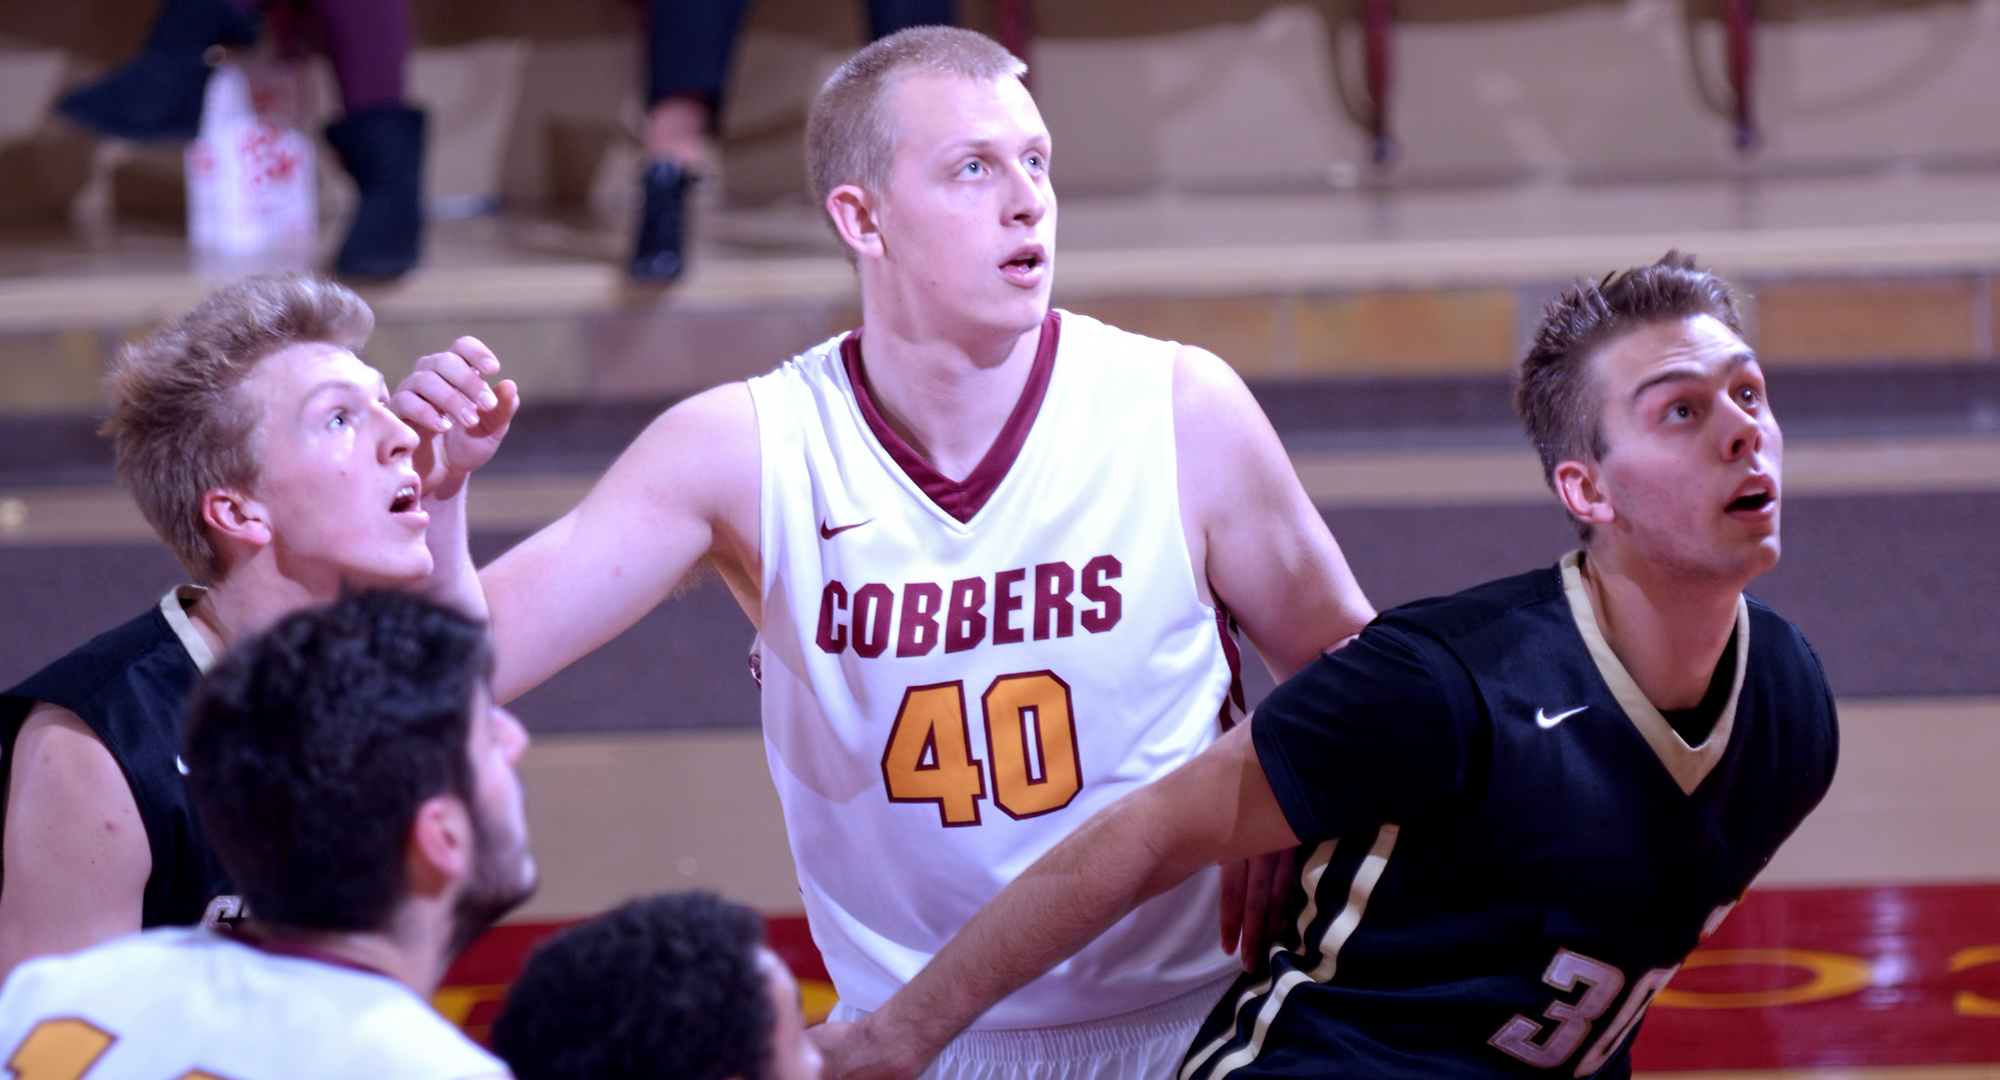 Senior Austin Heins scored a career-high 21 points in the Cobbers' game at St. Thomas.